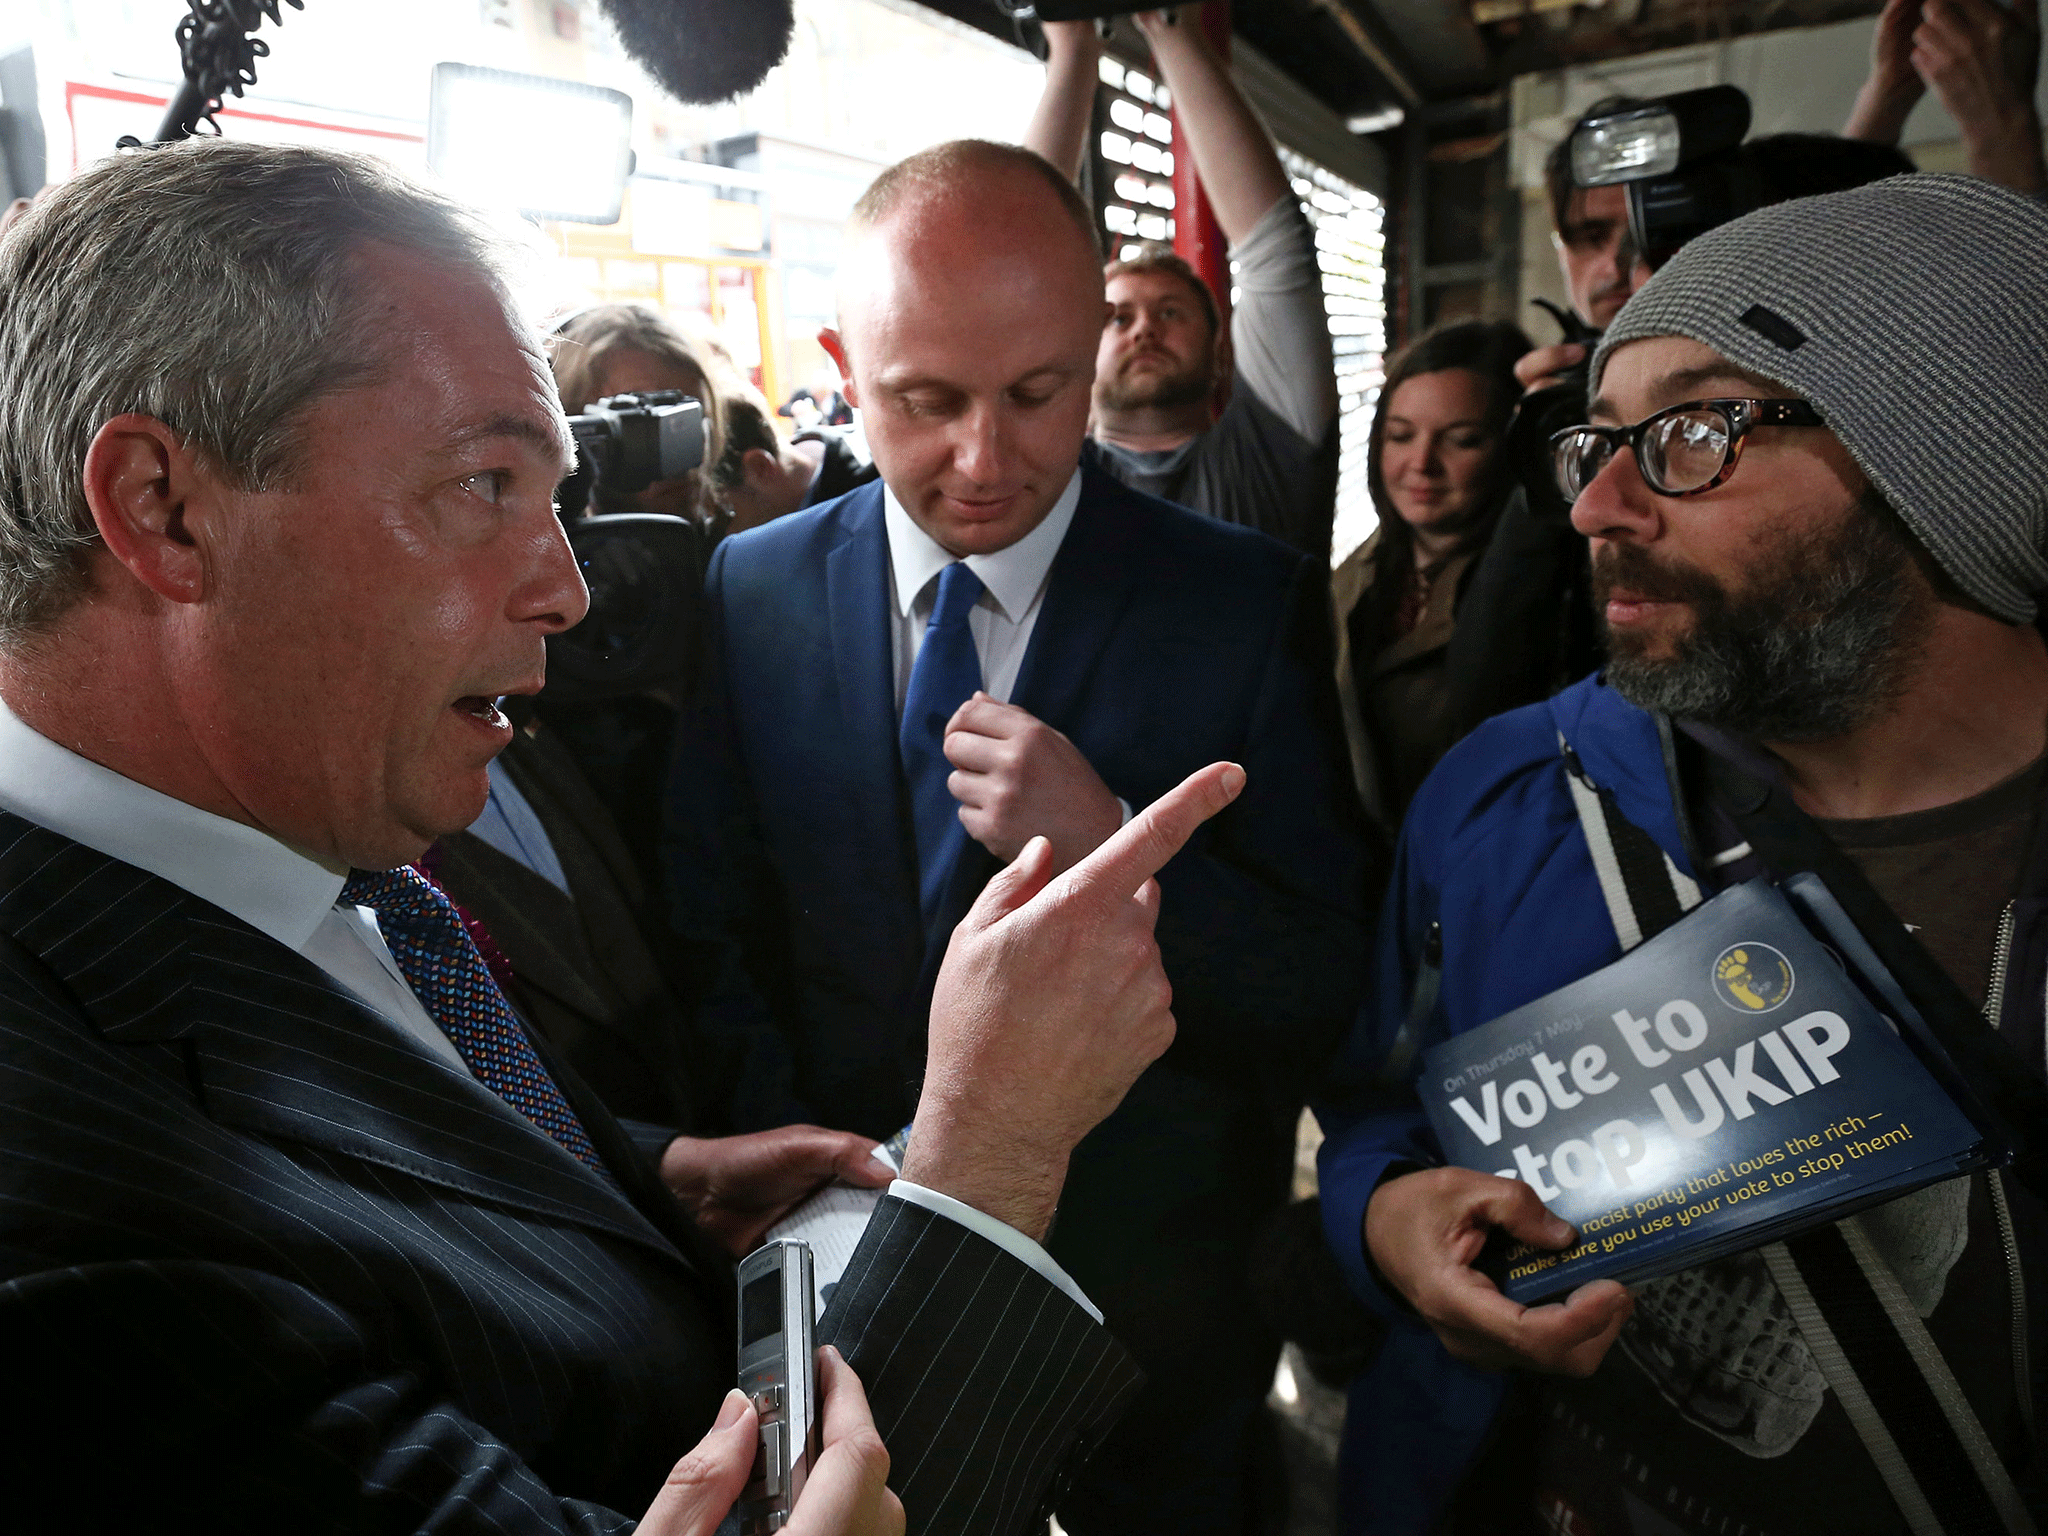 Nigel Farage argues with an anti-Ukip protester in Ramsgate during the election campaign